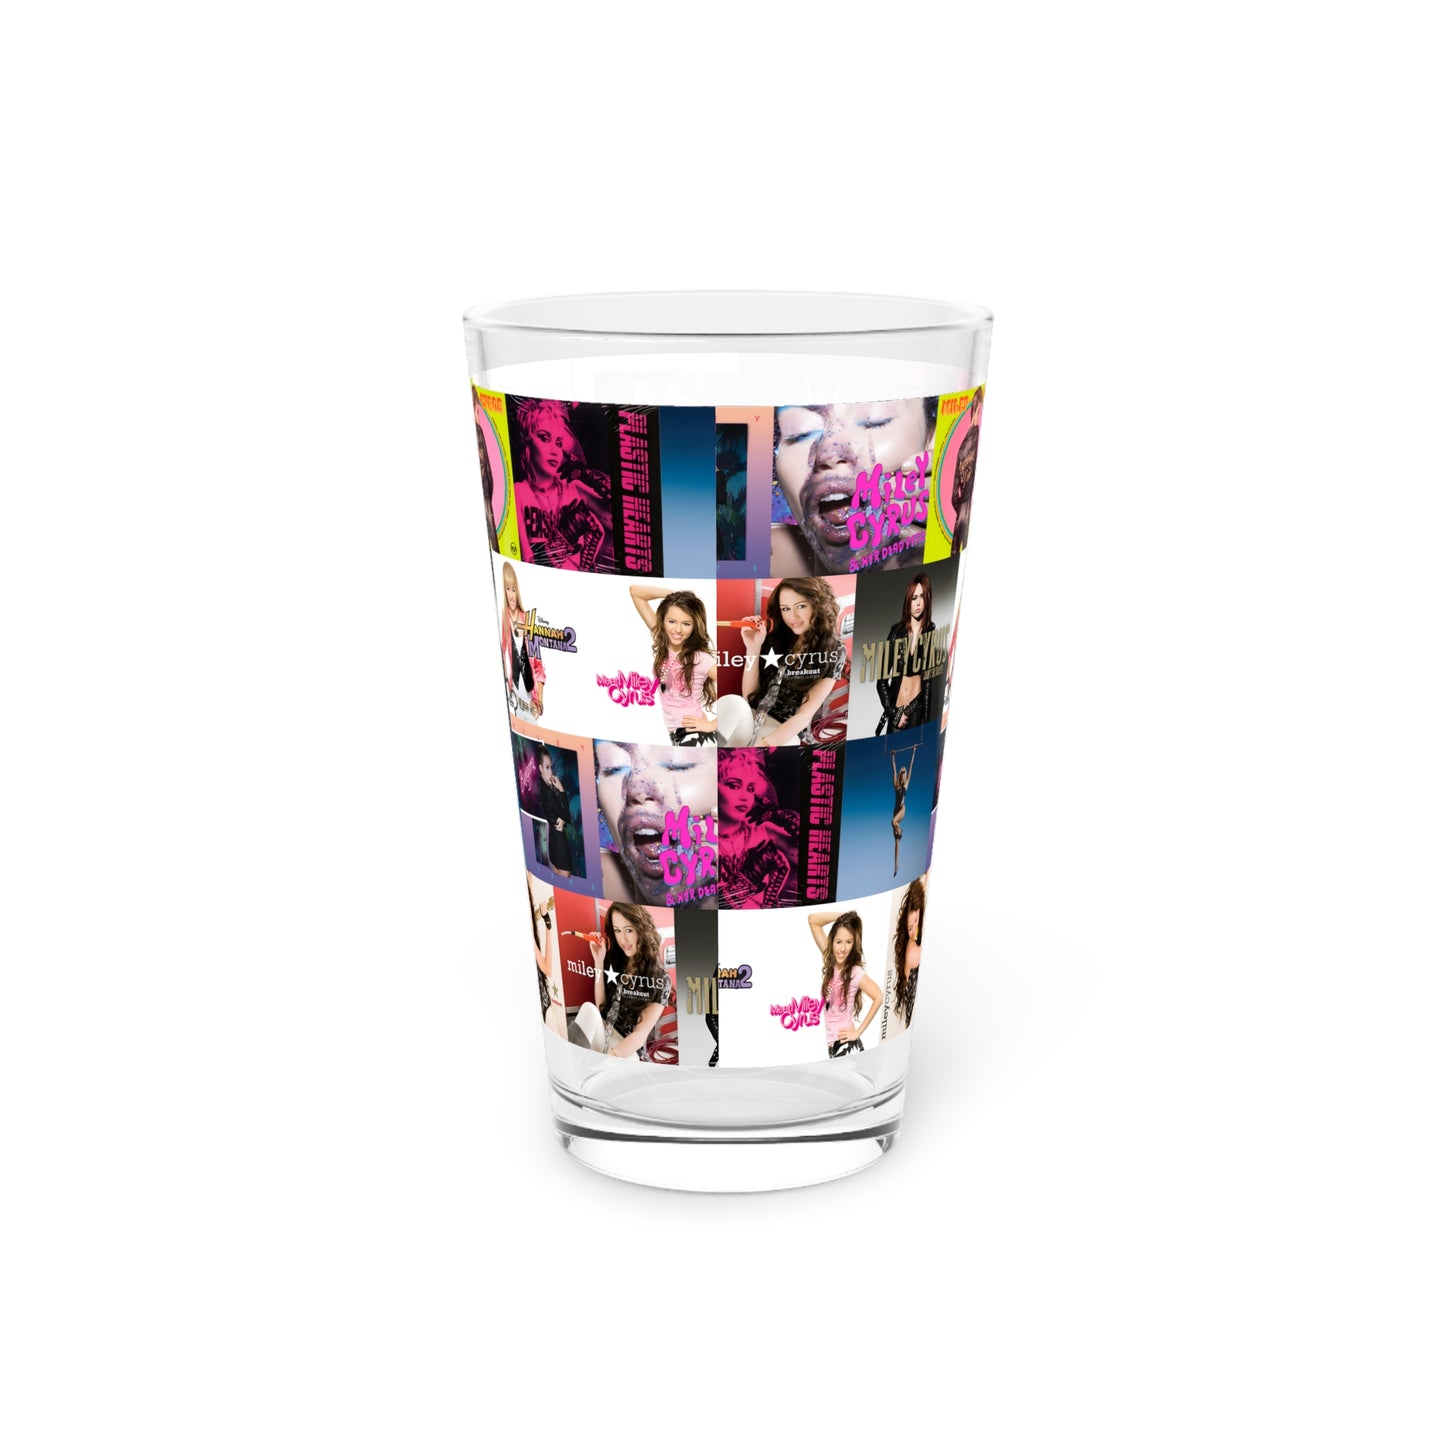 Miley Cyrus Album Cover Collage Pint Glass